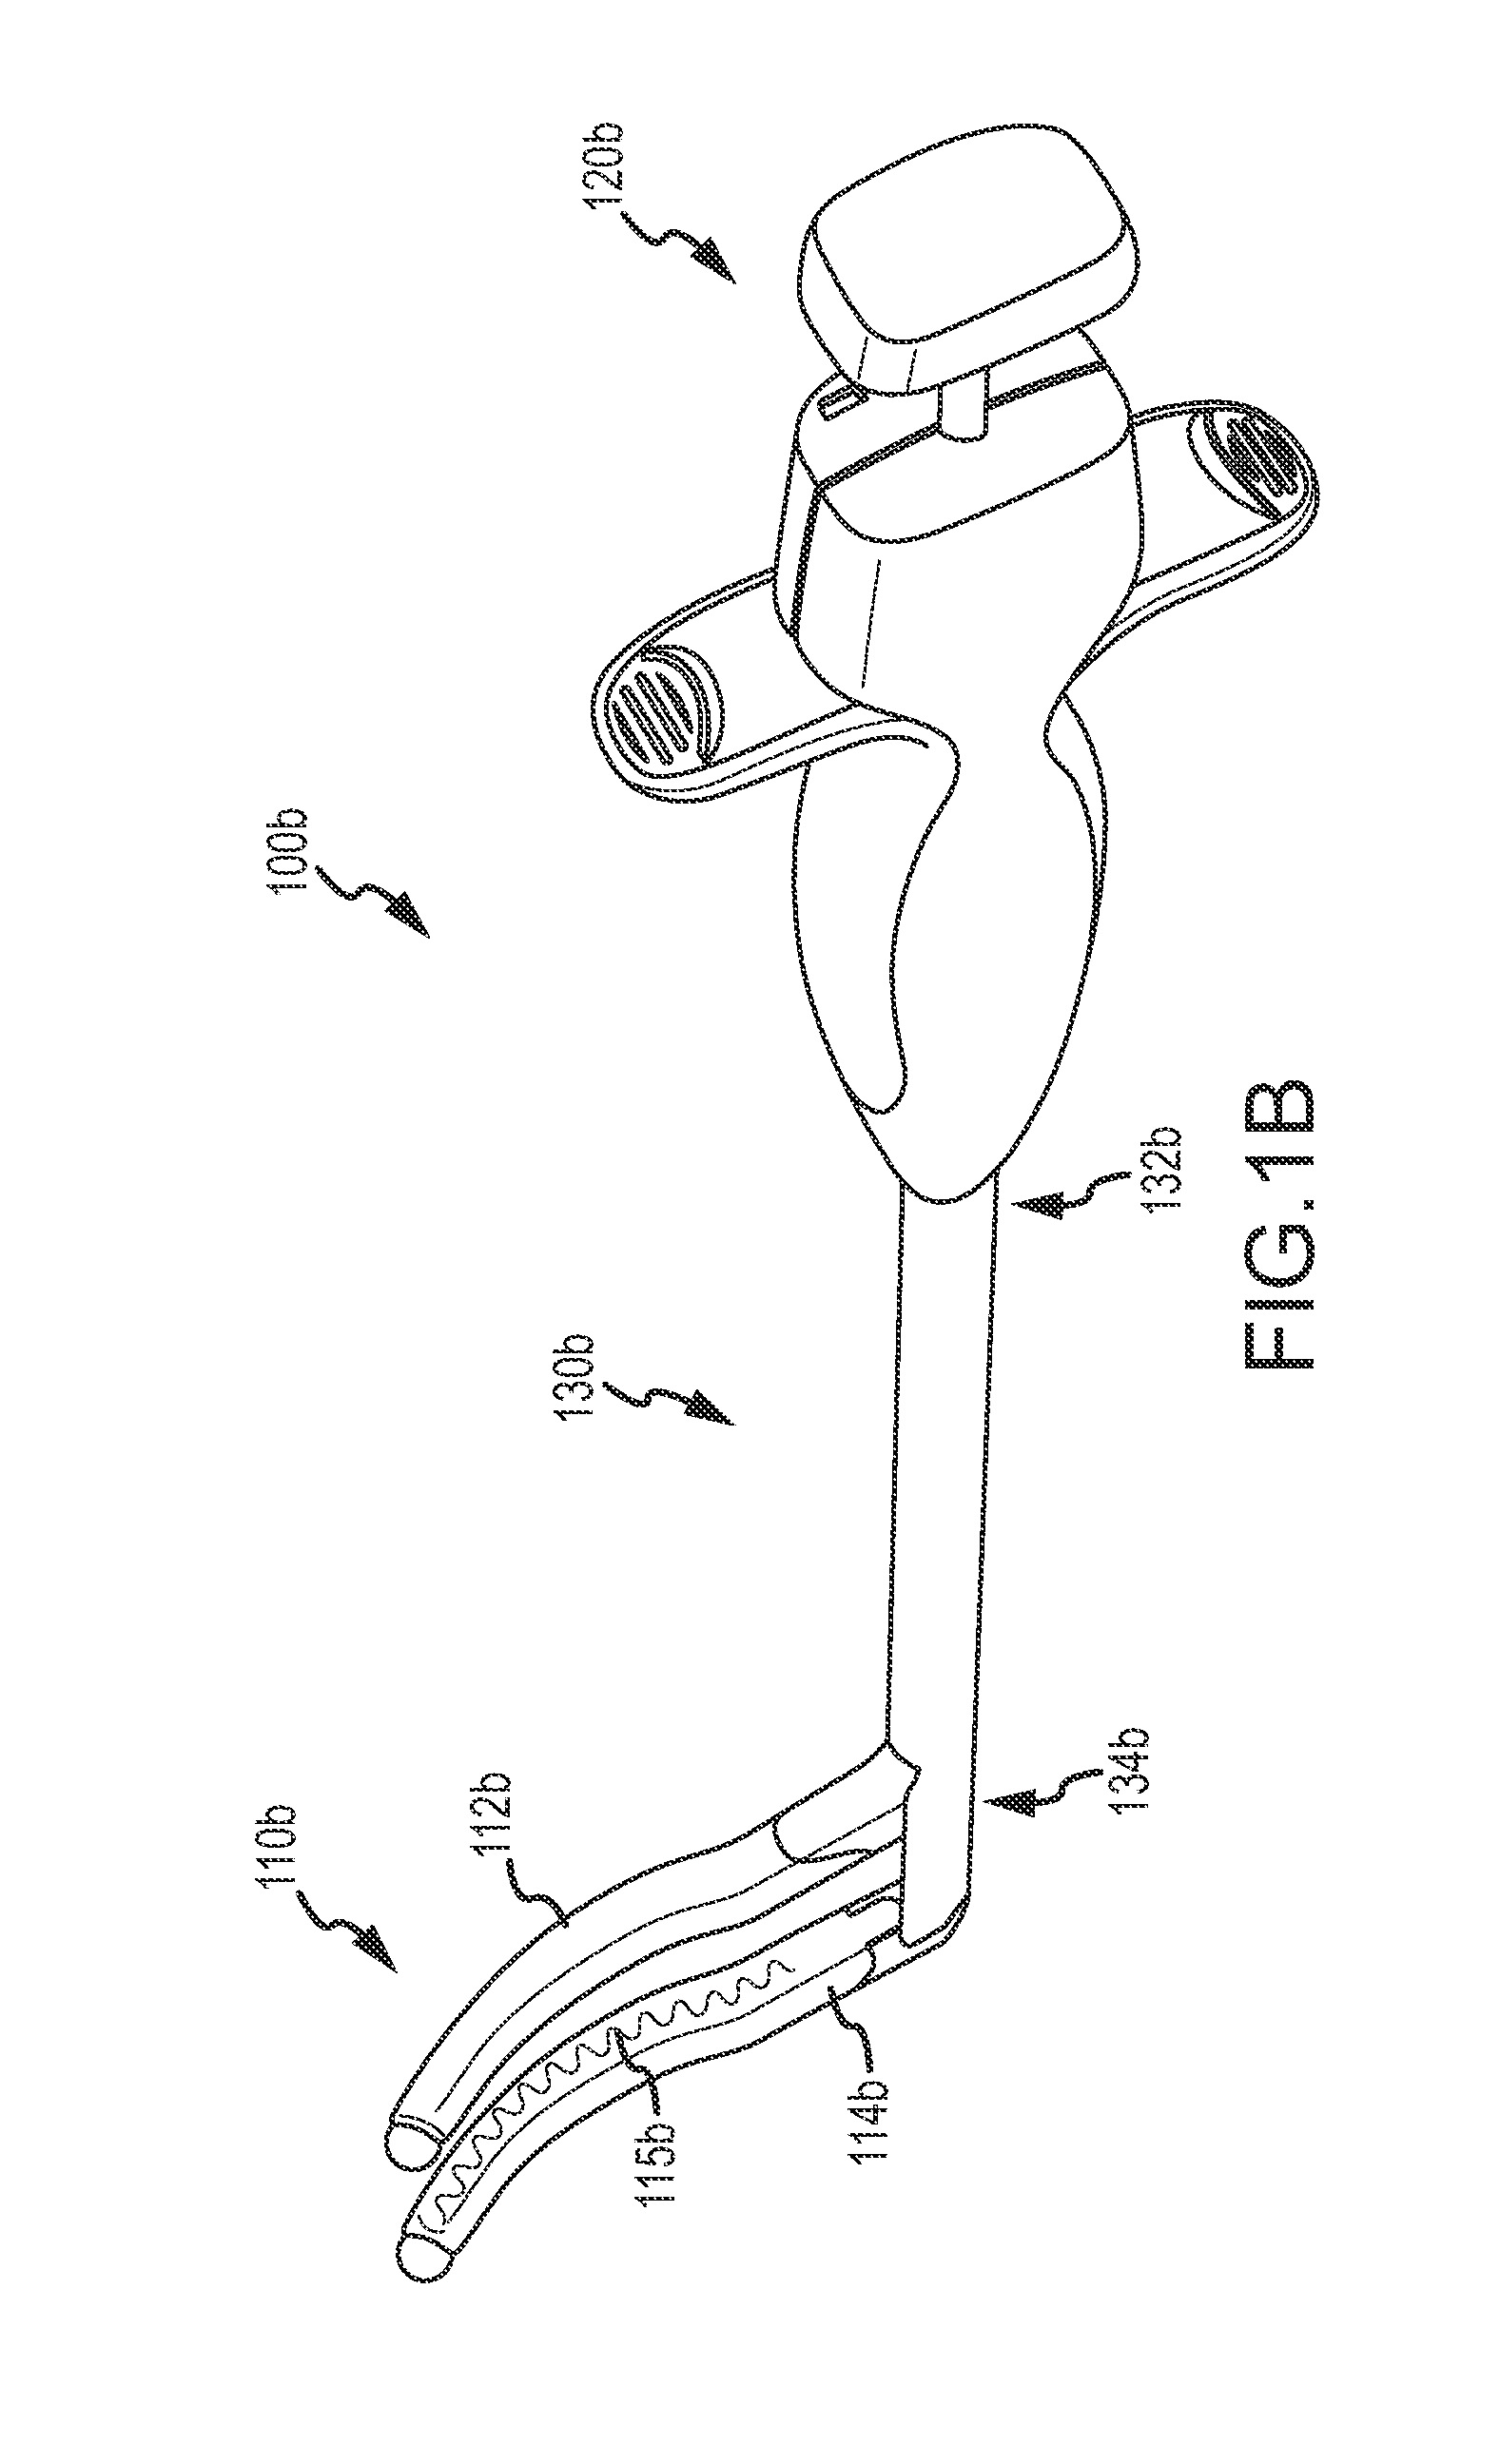 Adjustable clamp systems and methods